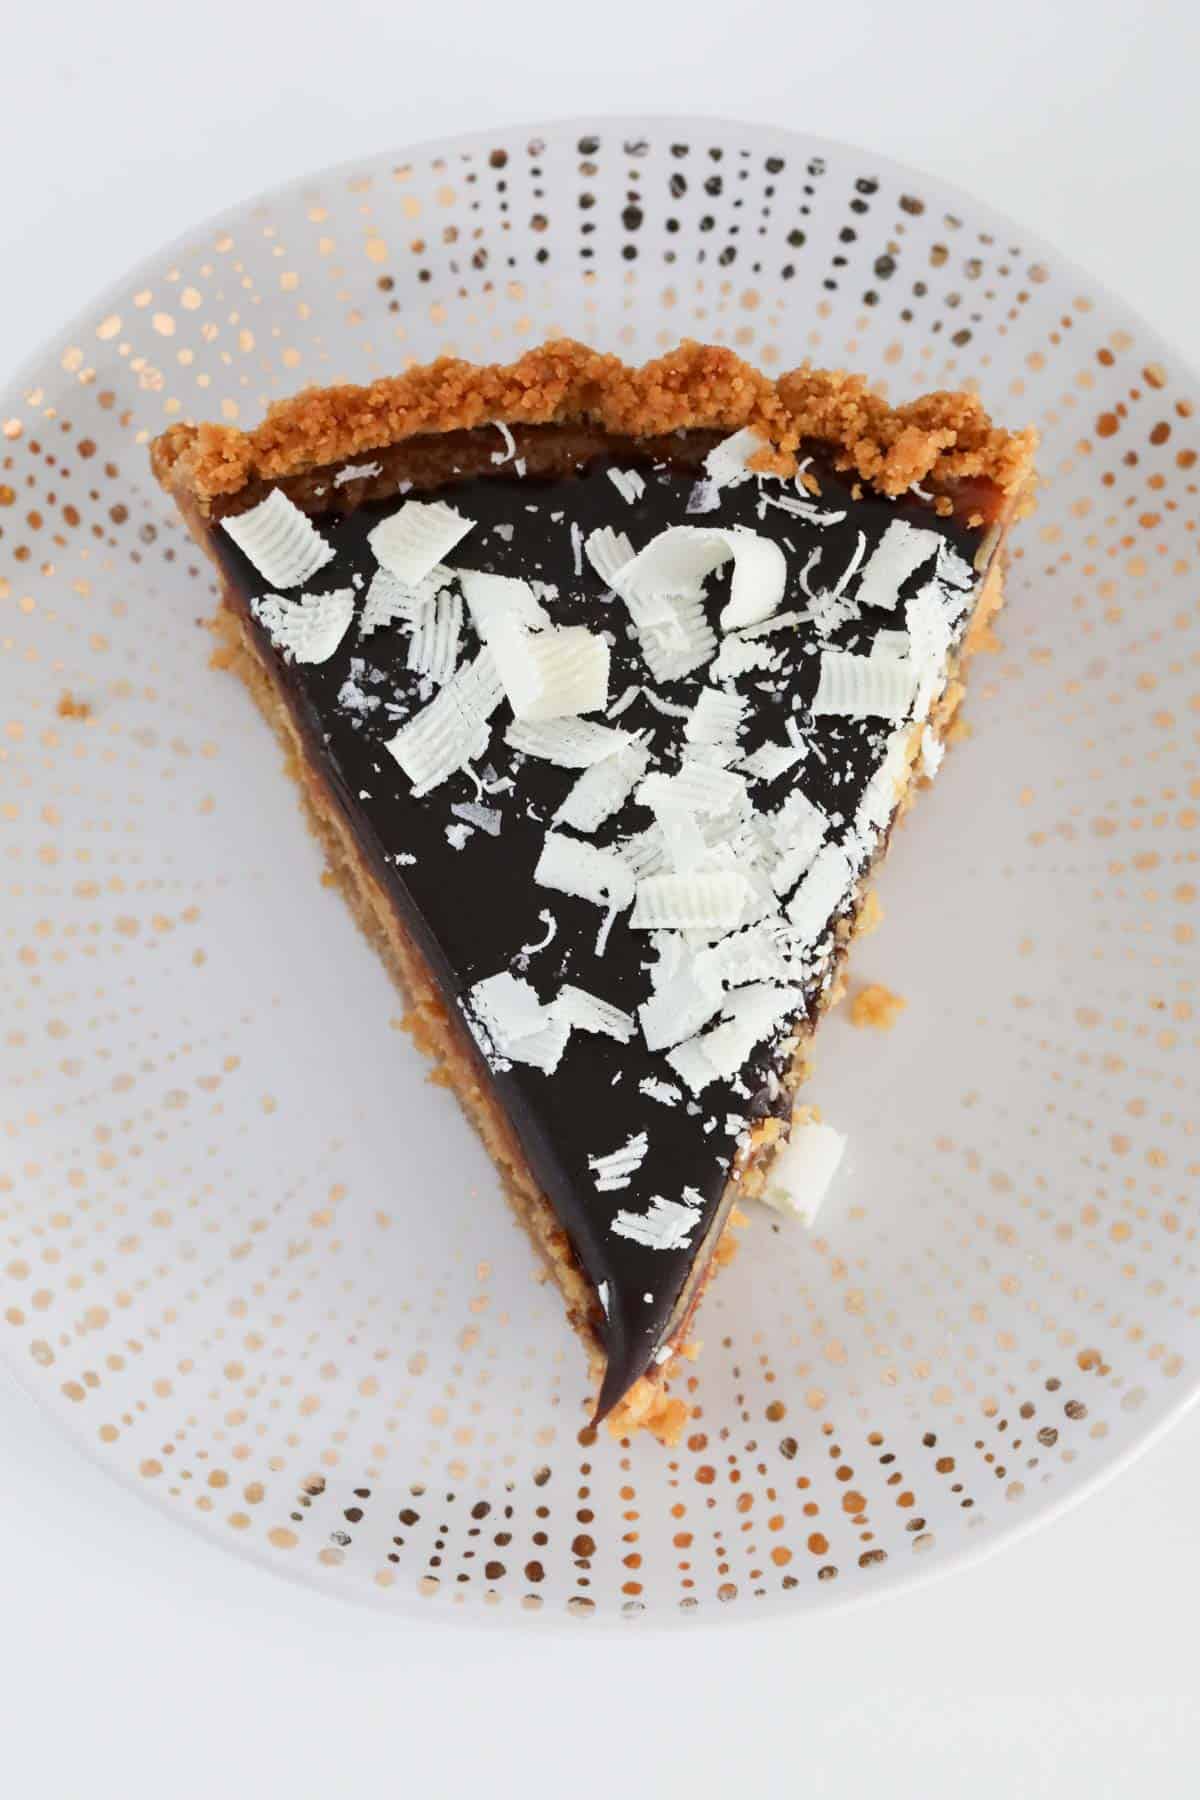 An overhead shot of chocolate caramel tart with grated white chocolate sprinkled over the top.